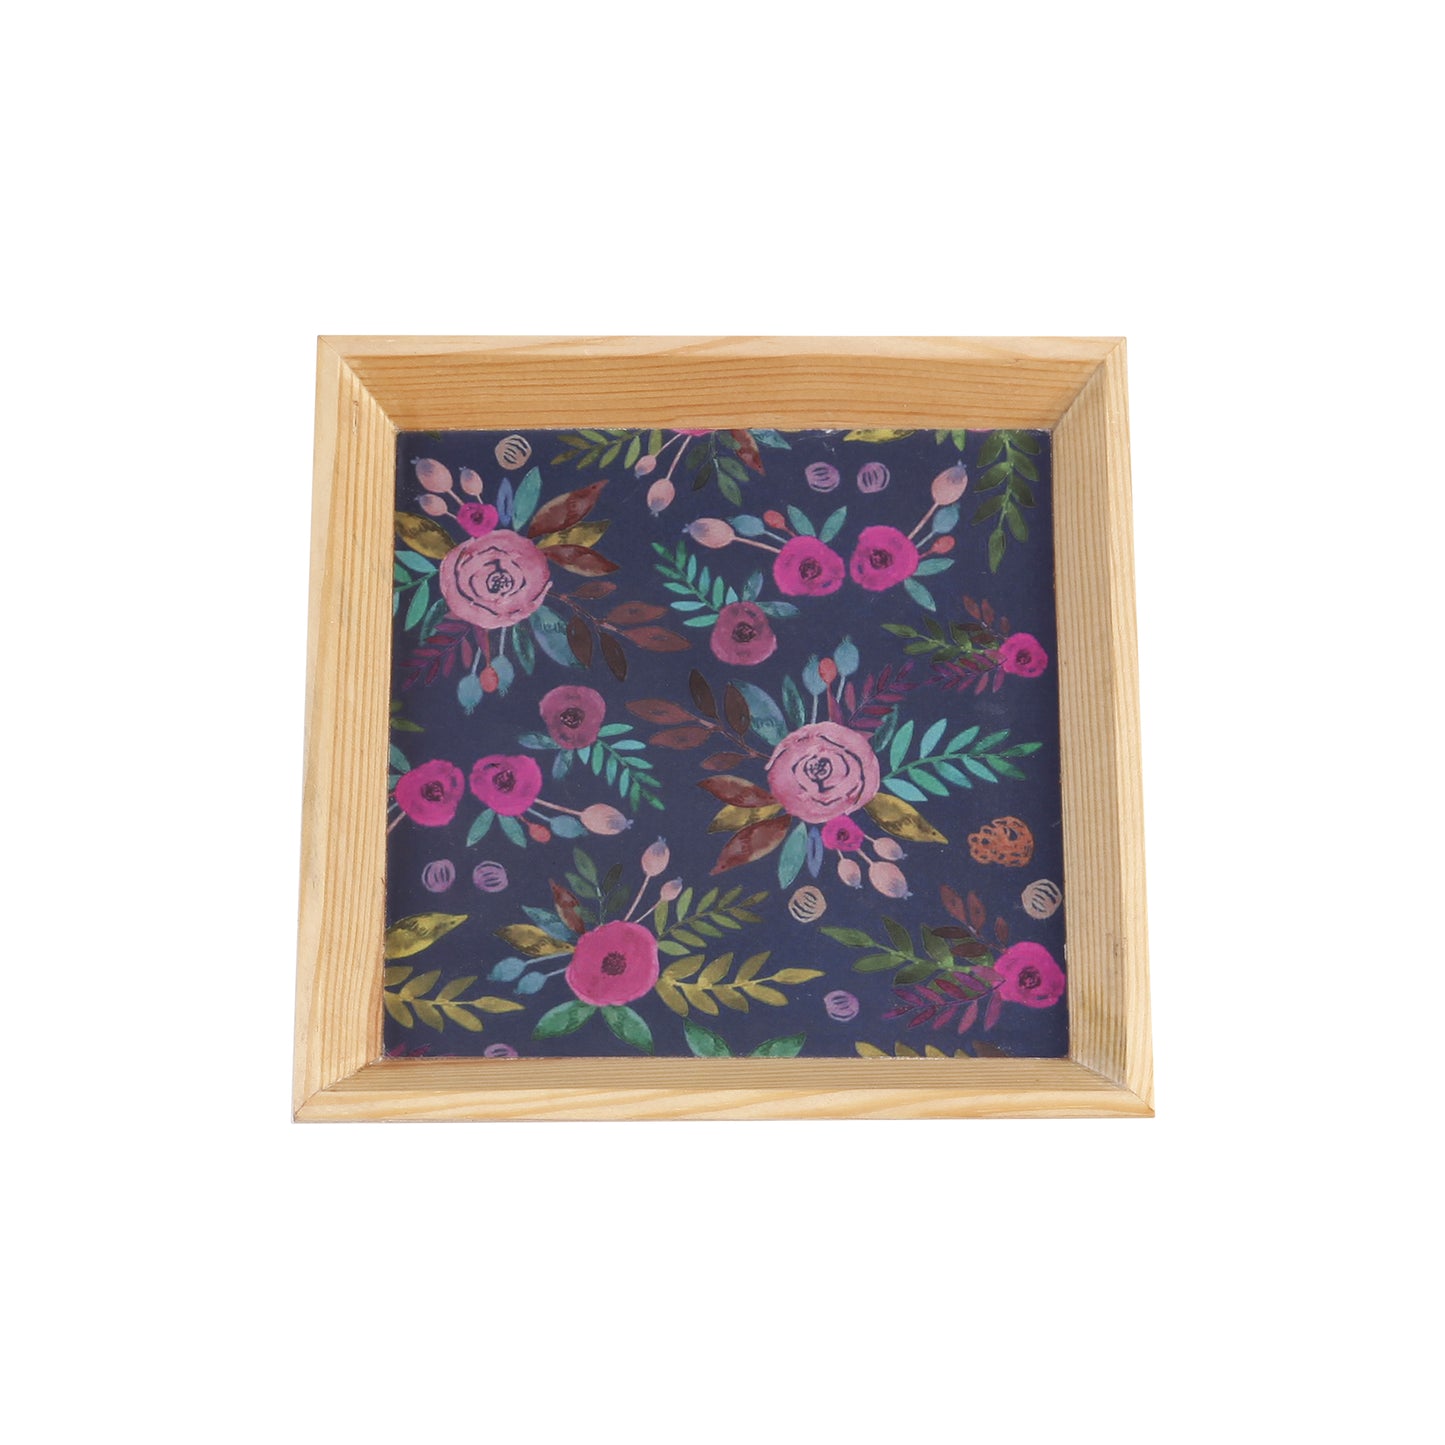 A Tiny Mistake Blue Floral Pattern Small Square Wooden Serving Tray, 18 x 18 x 2 cm